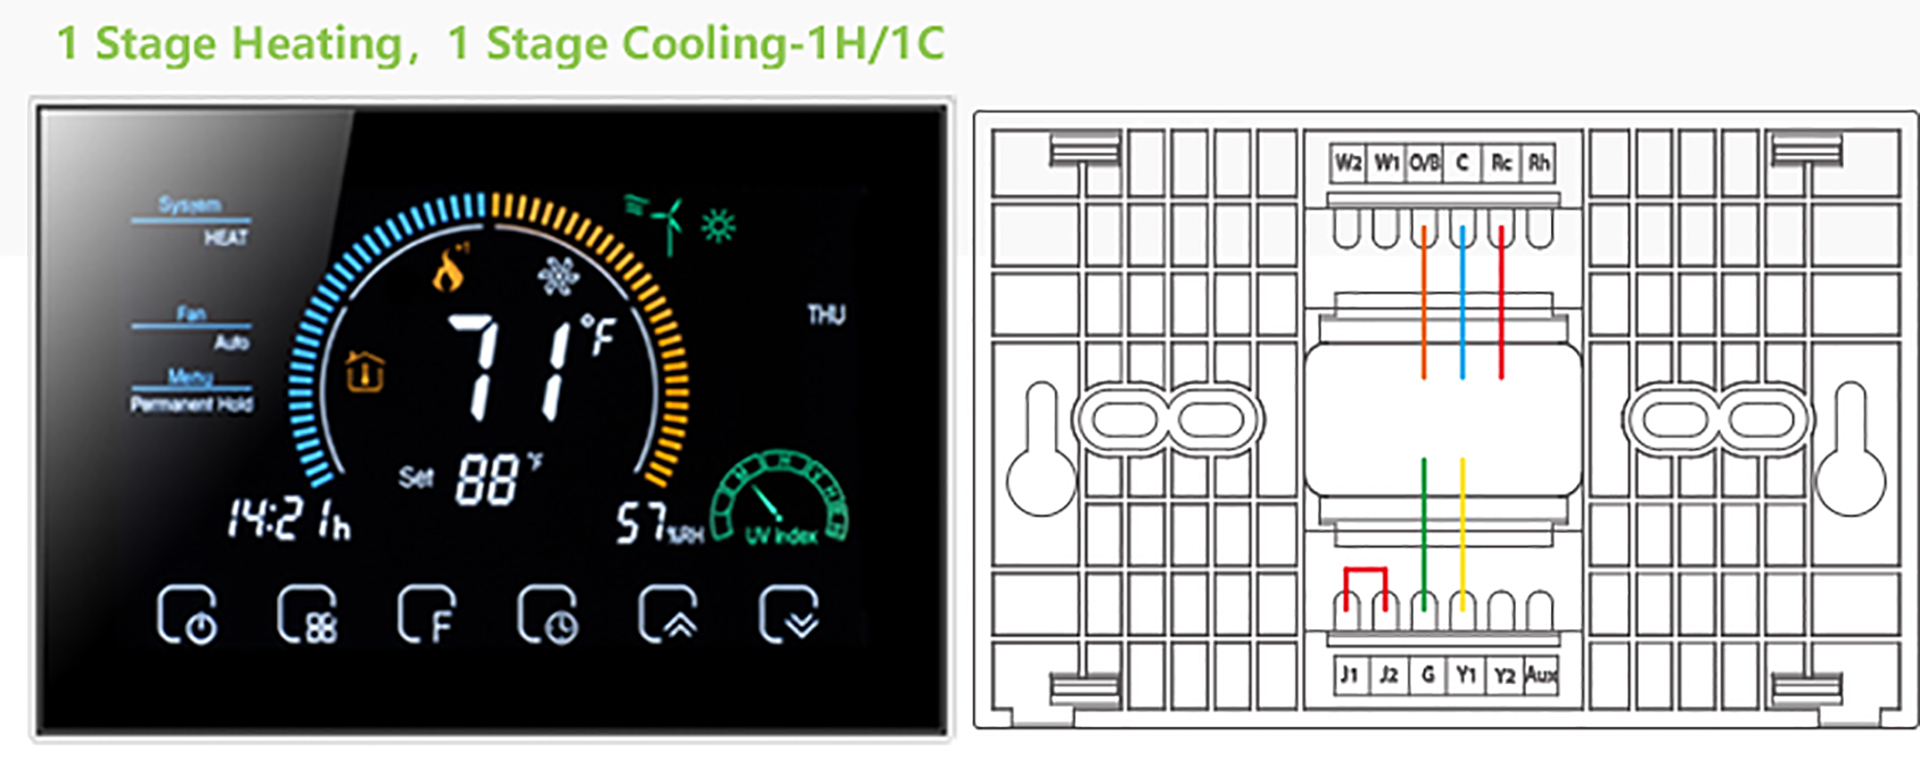 BECA BHP-8000 Non Wifi Conventional/Heat Pump Room Thermostat Support online purchase-Xiamen Beca Energysaving Technology